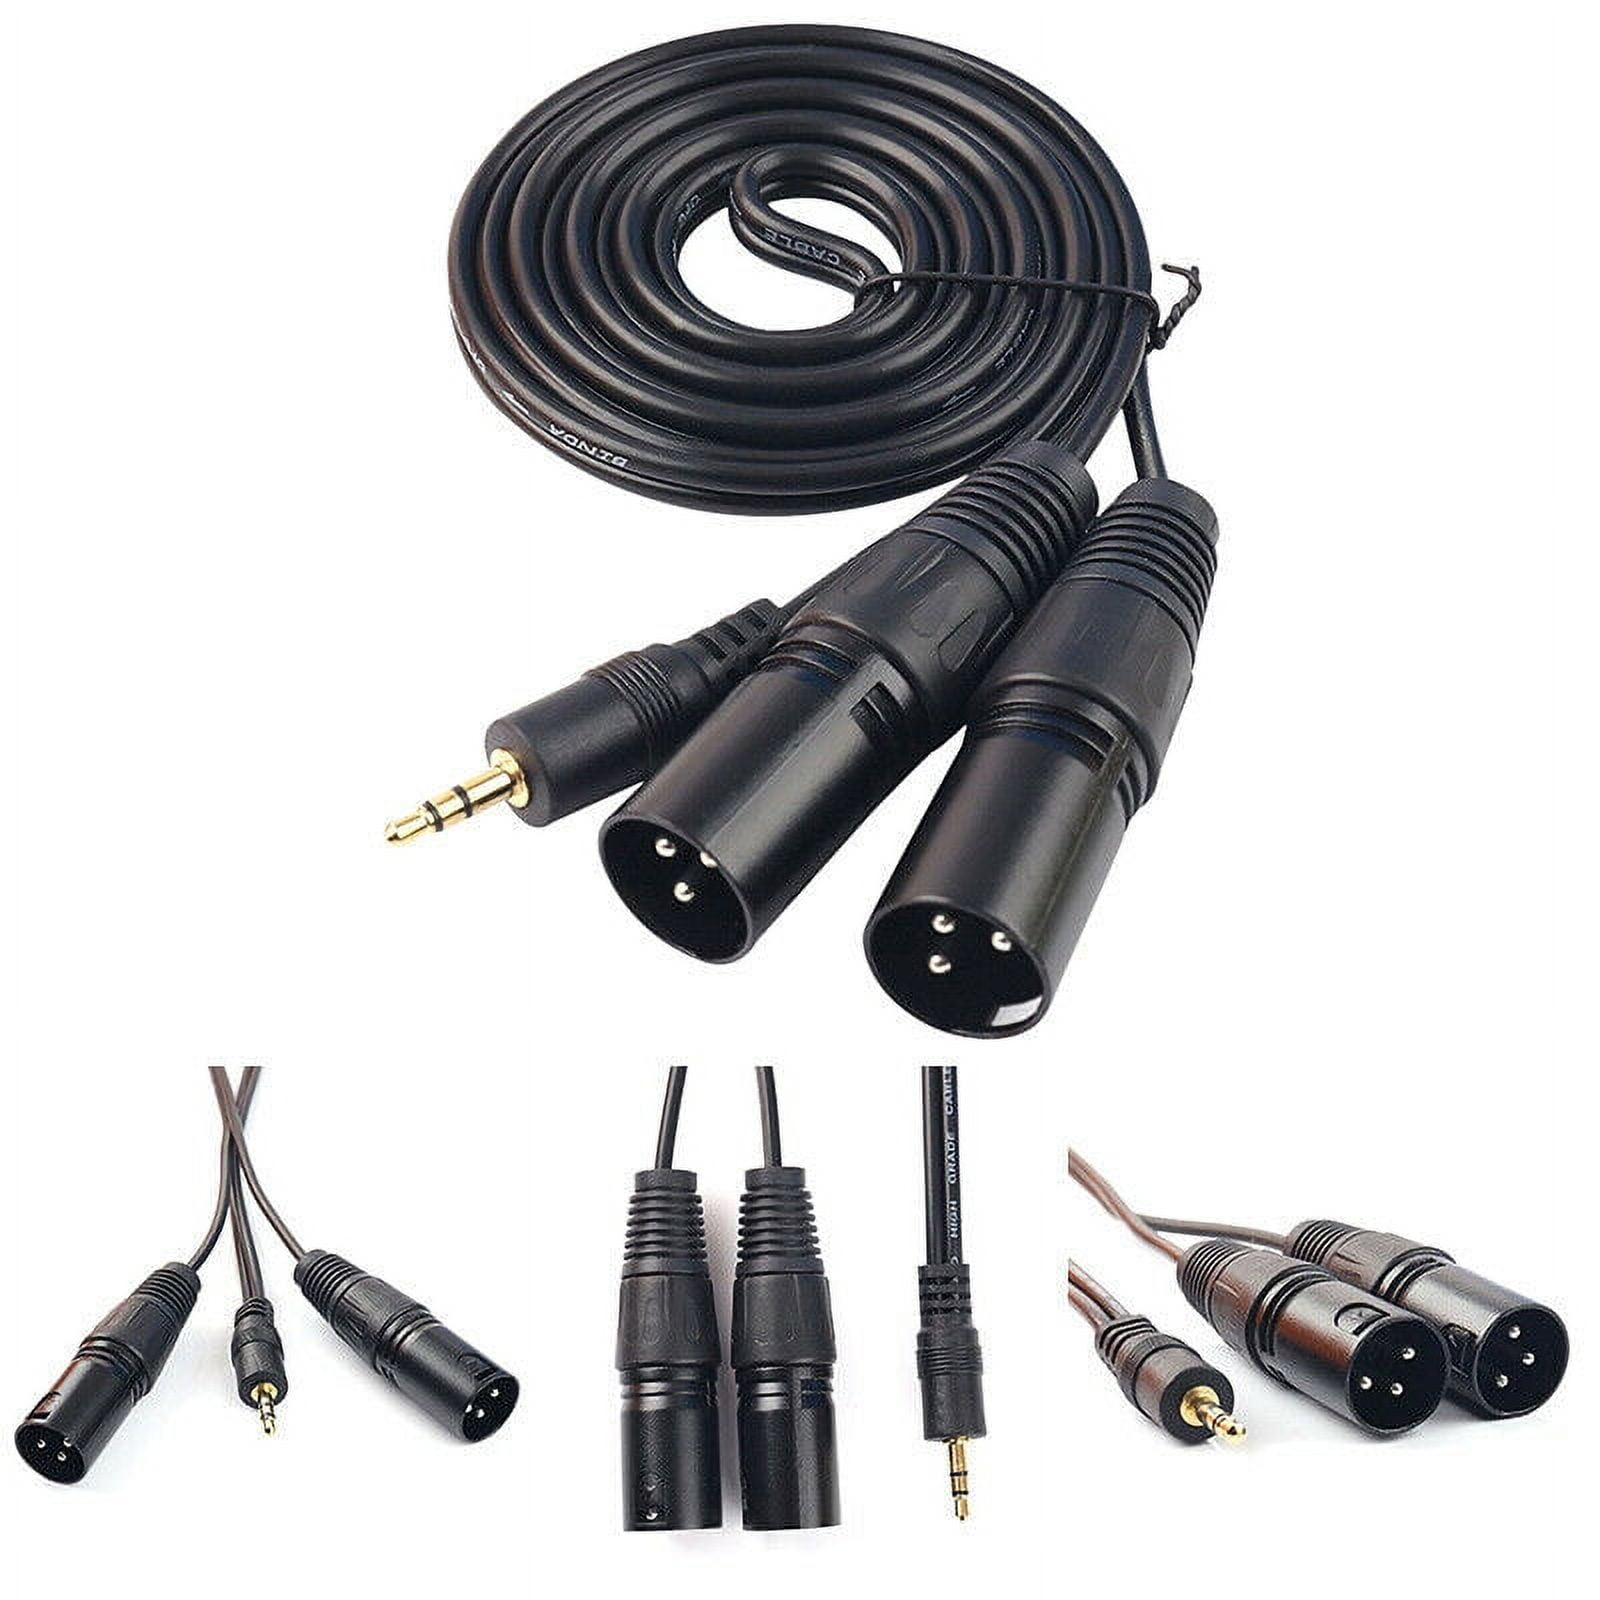 EBXYA XLR to RCA Y Splitter Cable - XLR Male to Double RCA Female  Microphone Cord Adapter 3 Feet, Black